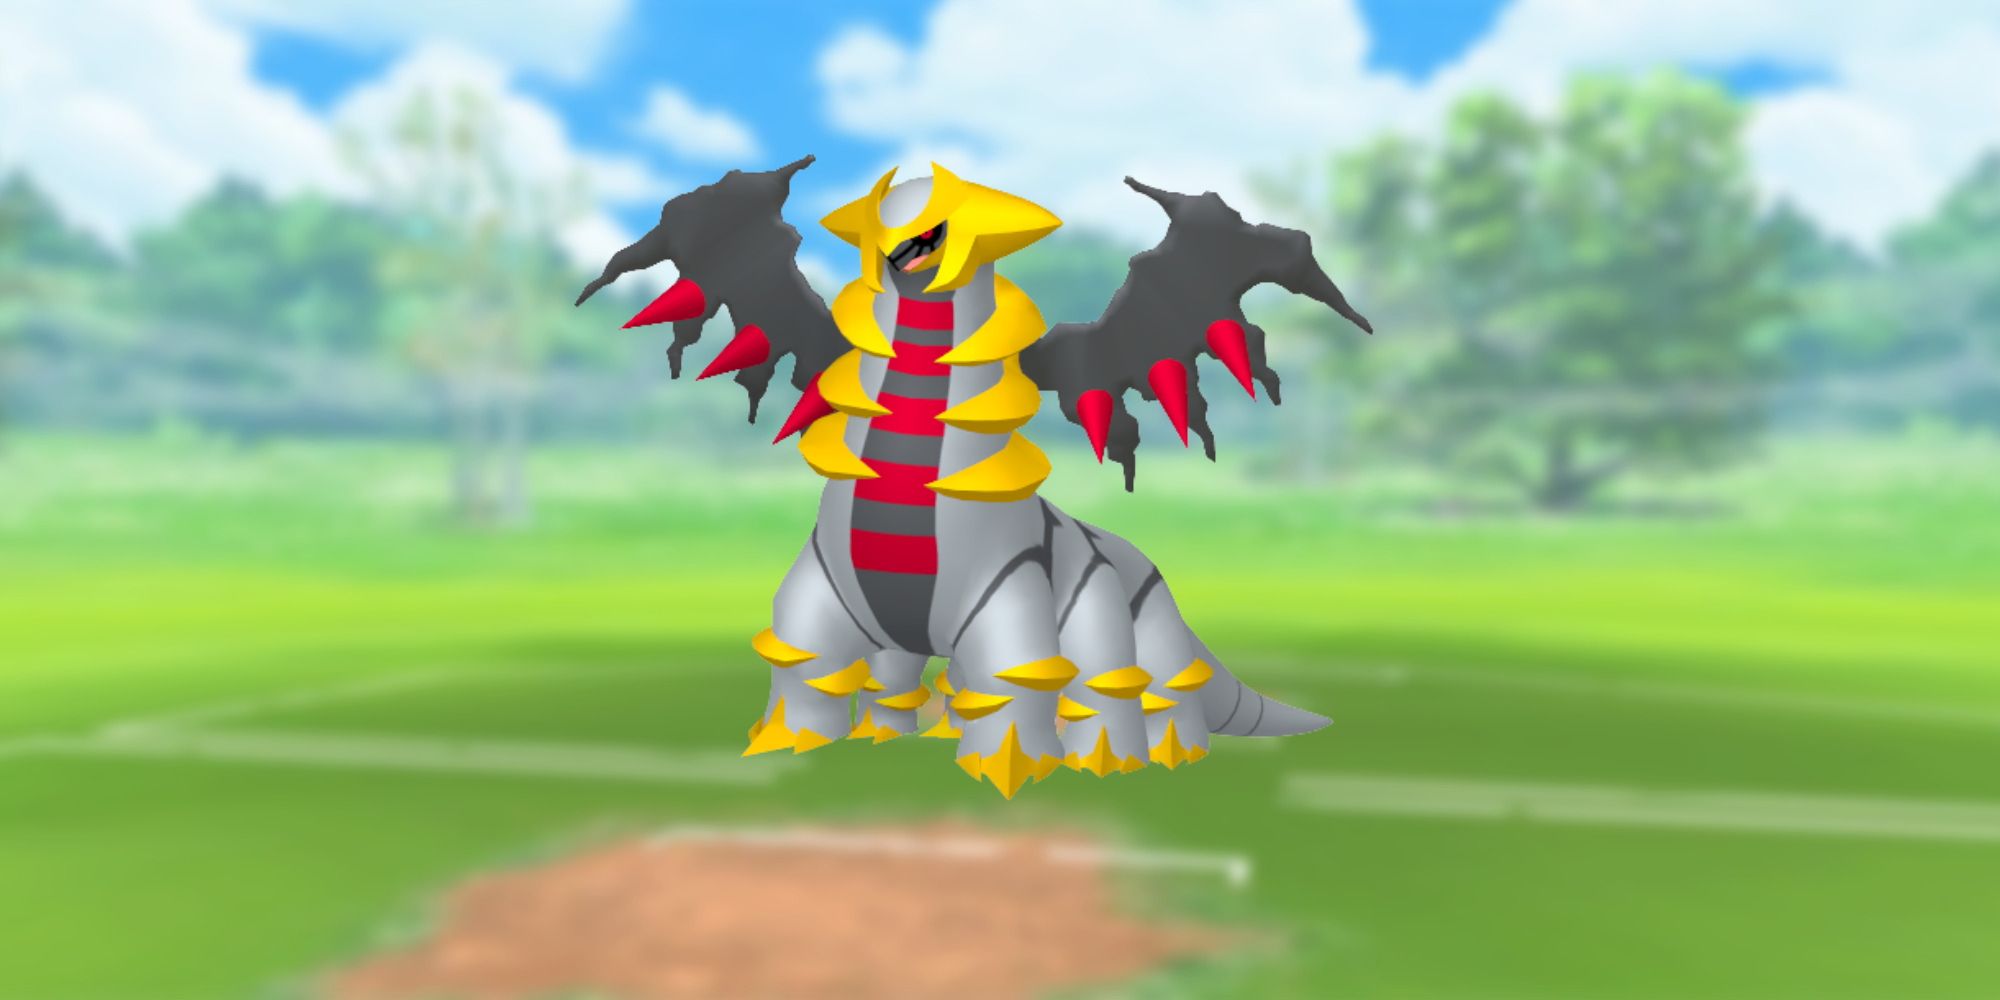 Giratina from Pokemon with the Pokemon Go battlefield as the background